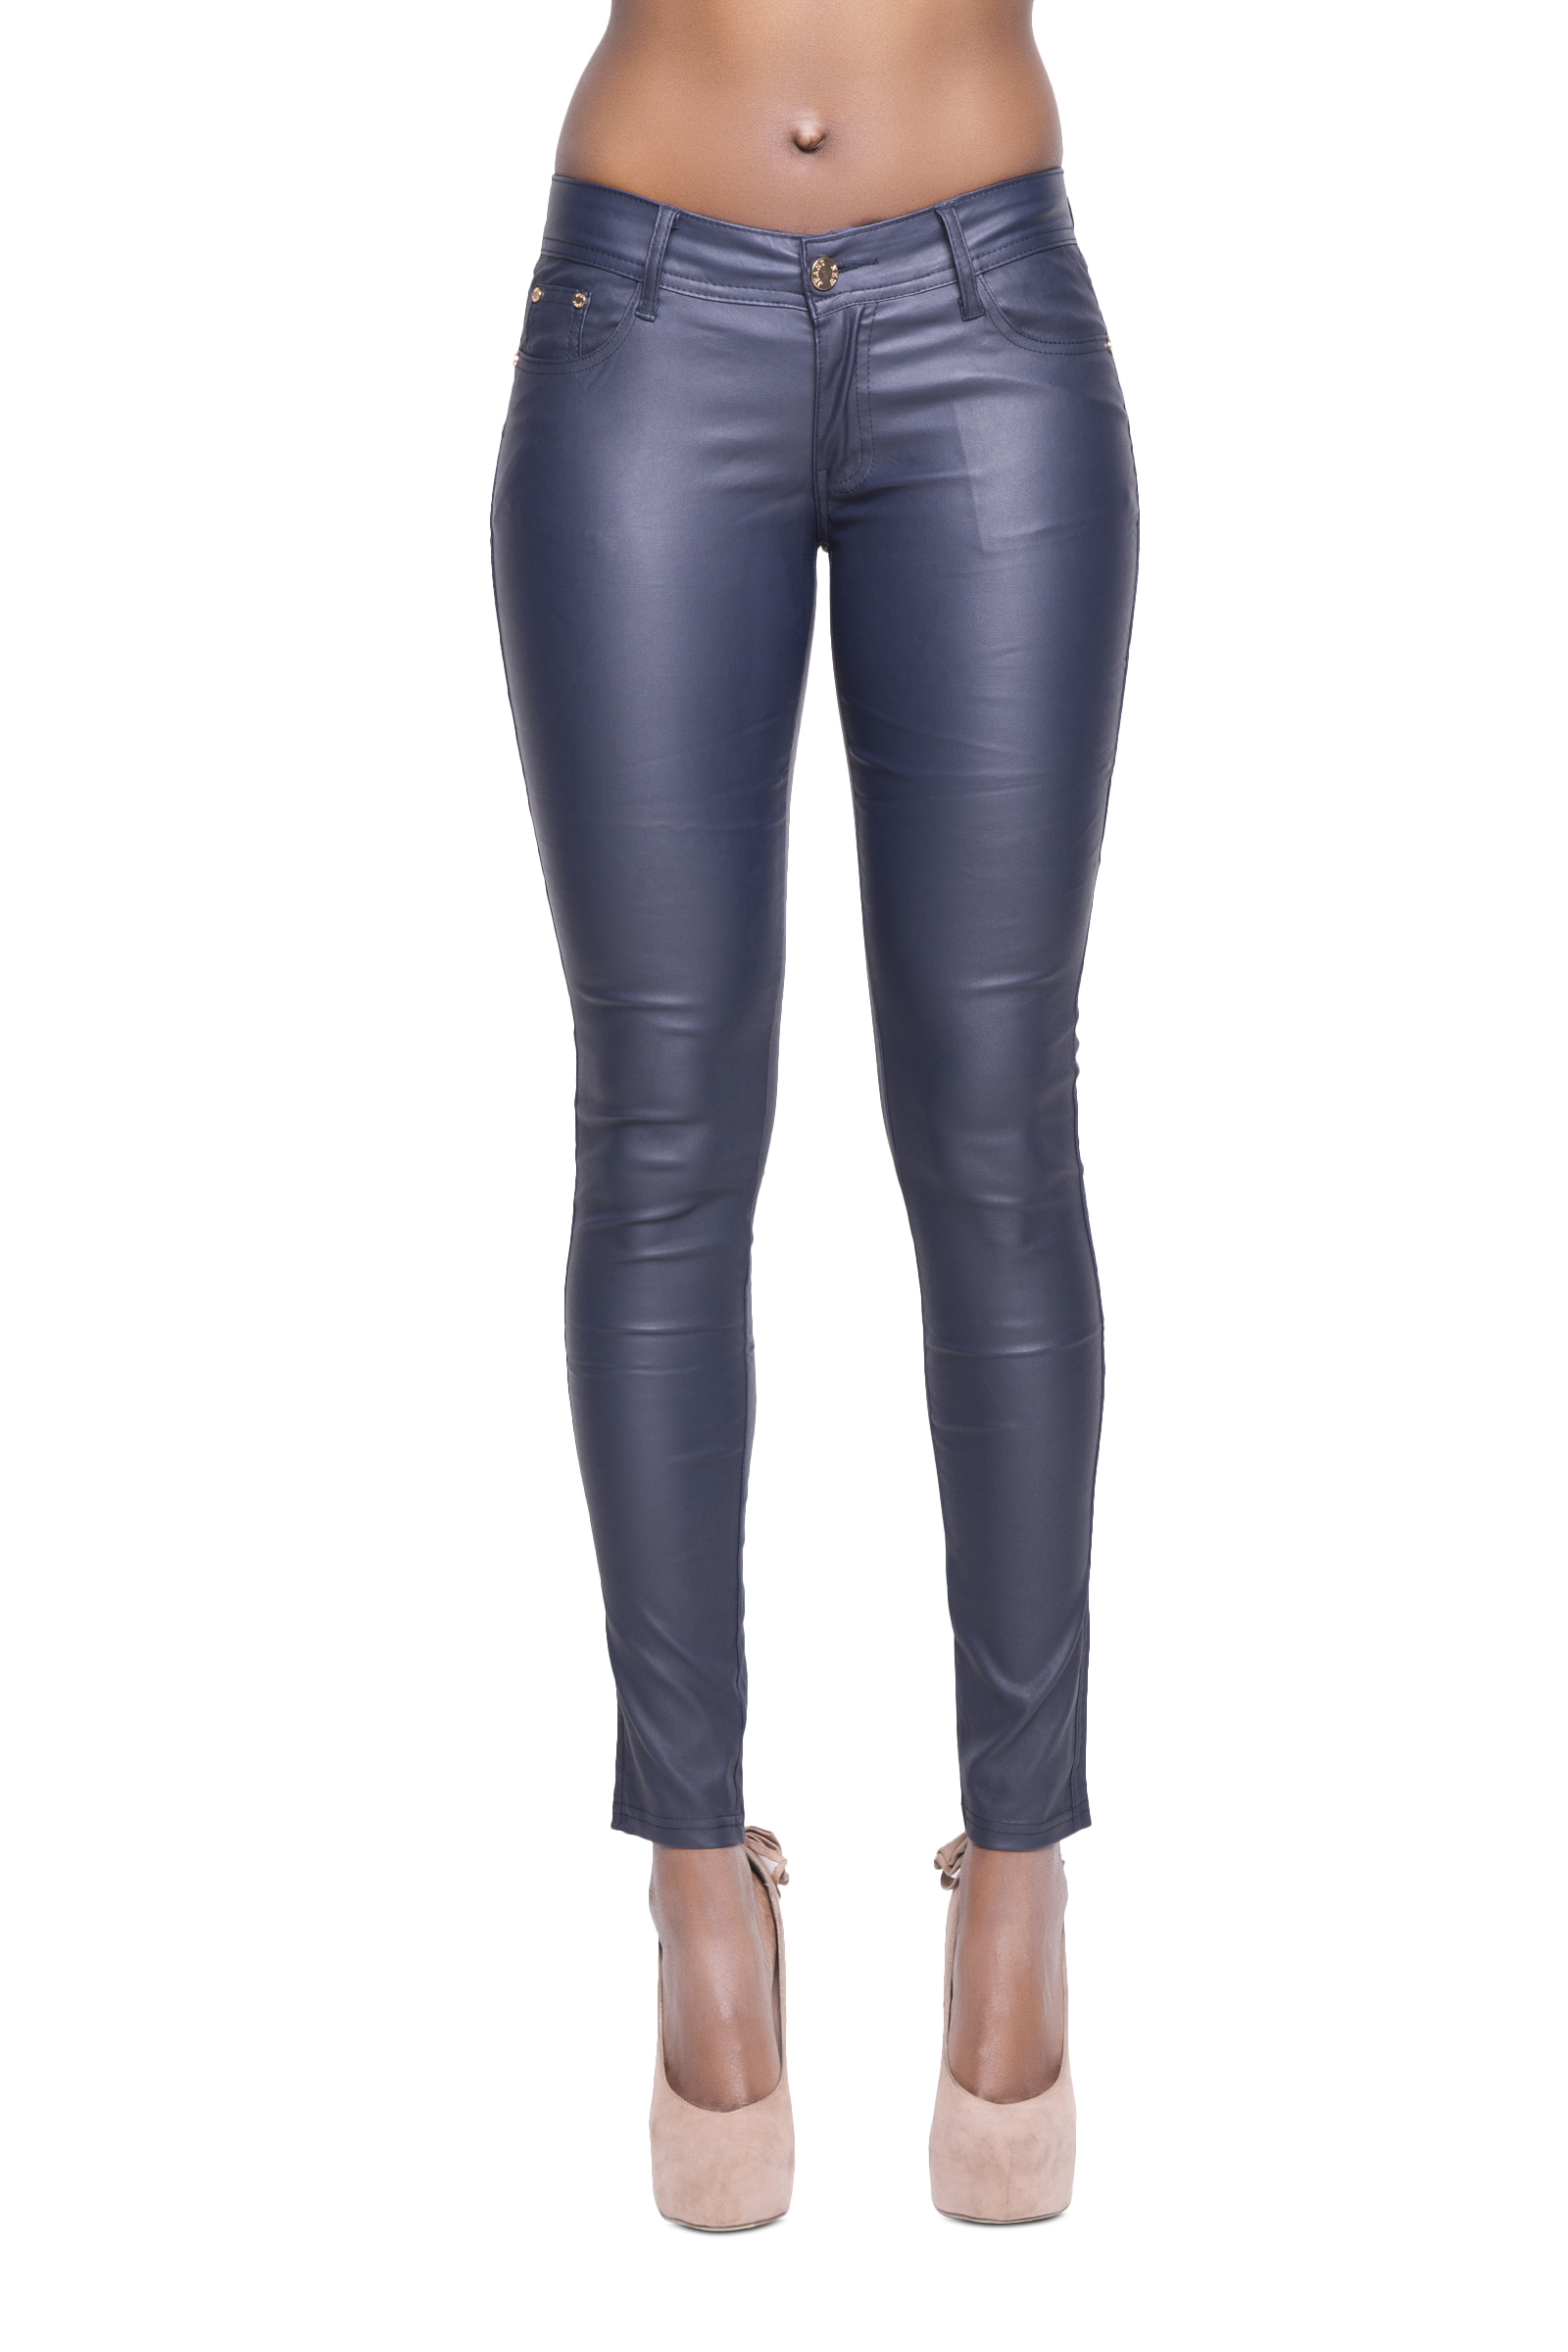 Melody Navy Blue Leather Pants Four Ways Stretchable Fleece Lined Thermal  Leggings Ladies Leather Scrunch Butt Pant For Winter - Pants & Capris -  AliExpress